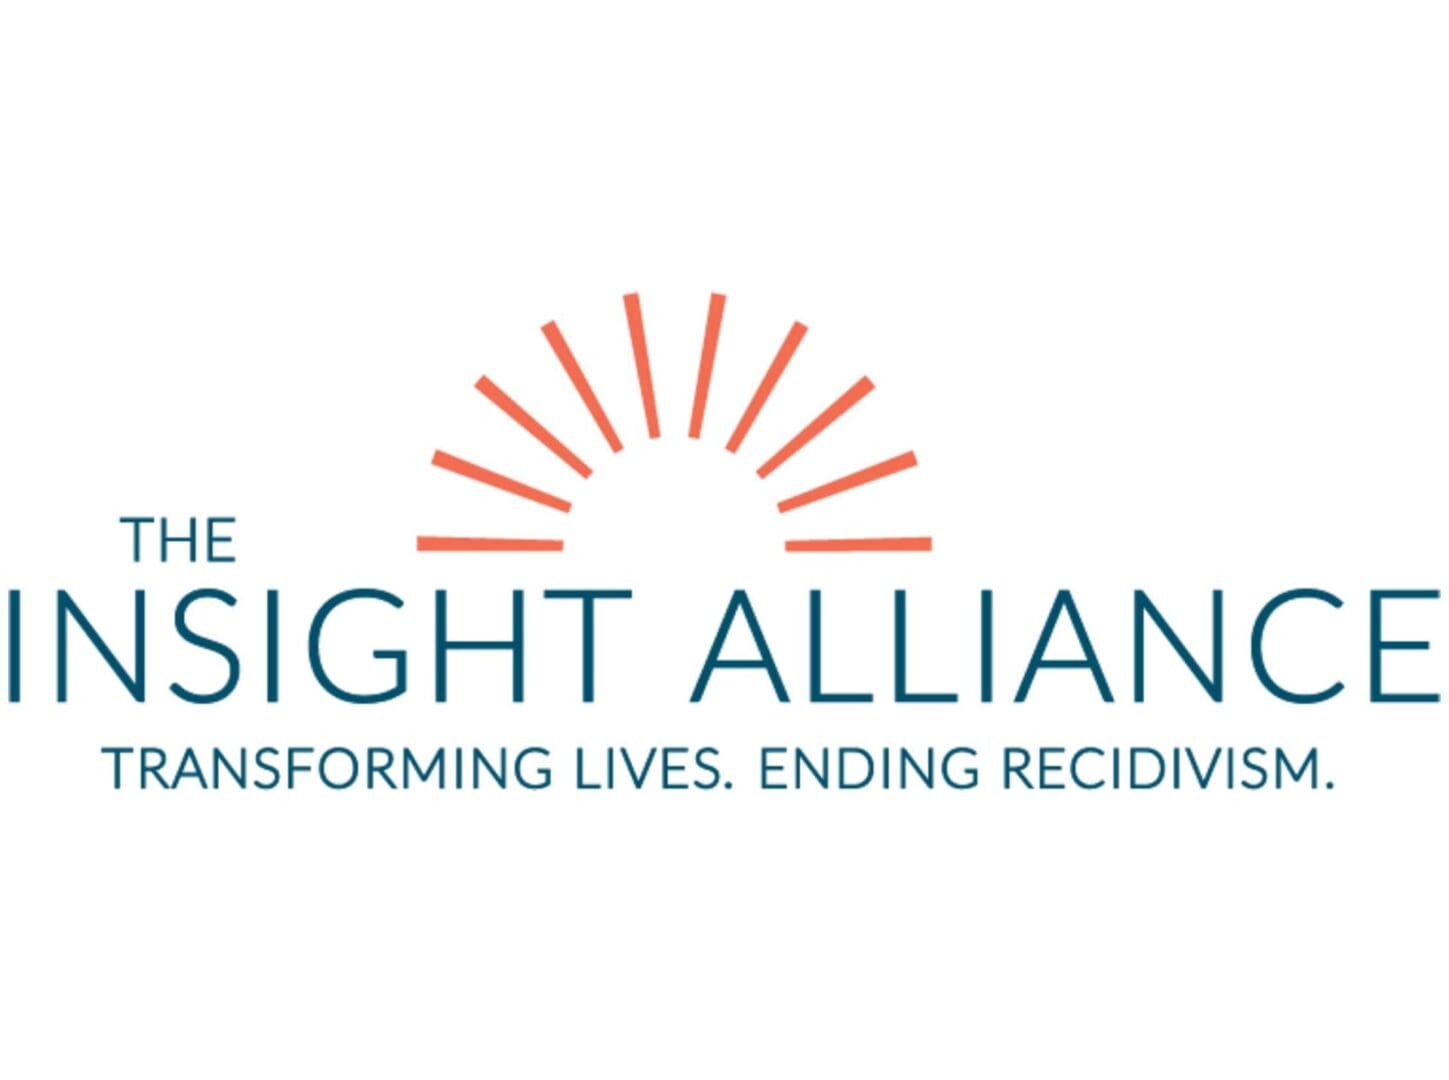 A logo of the insight alliance.